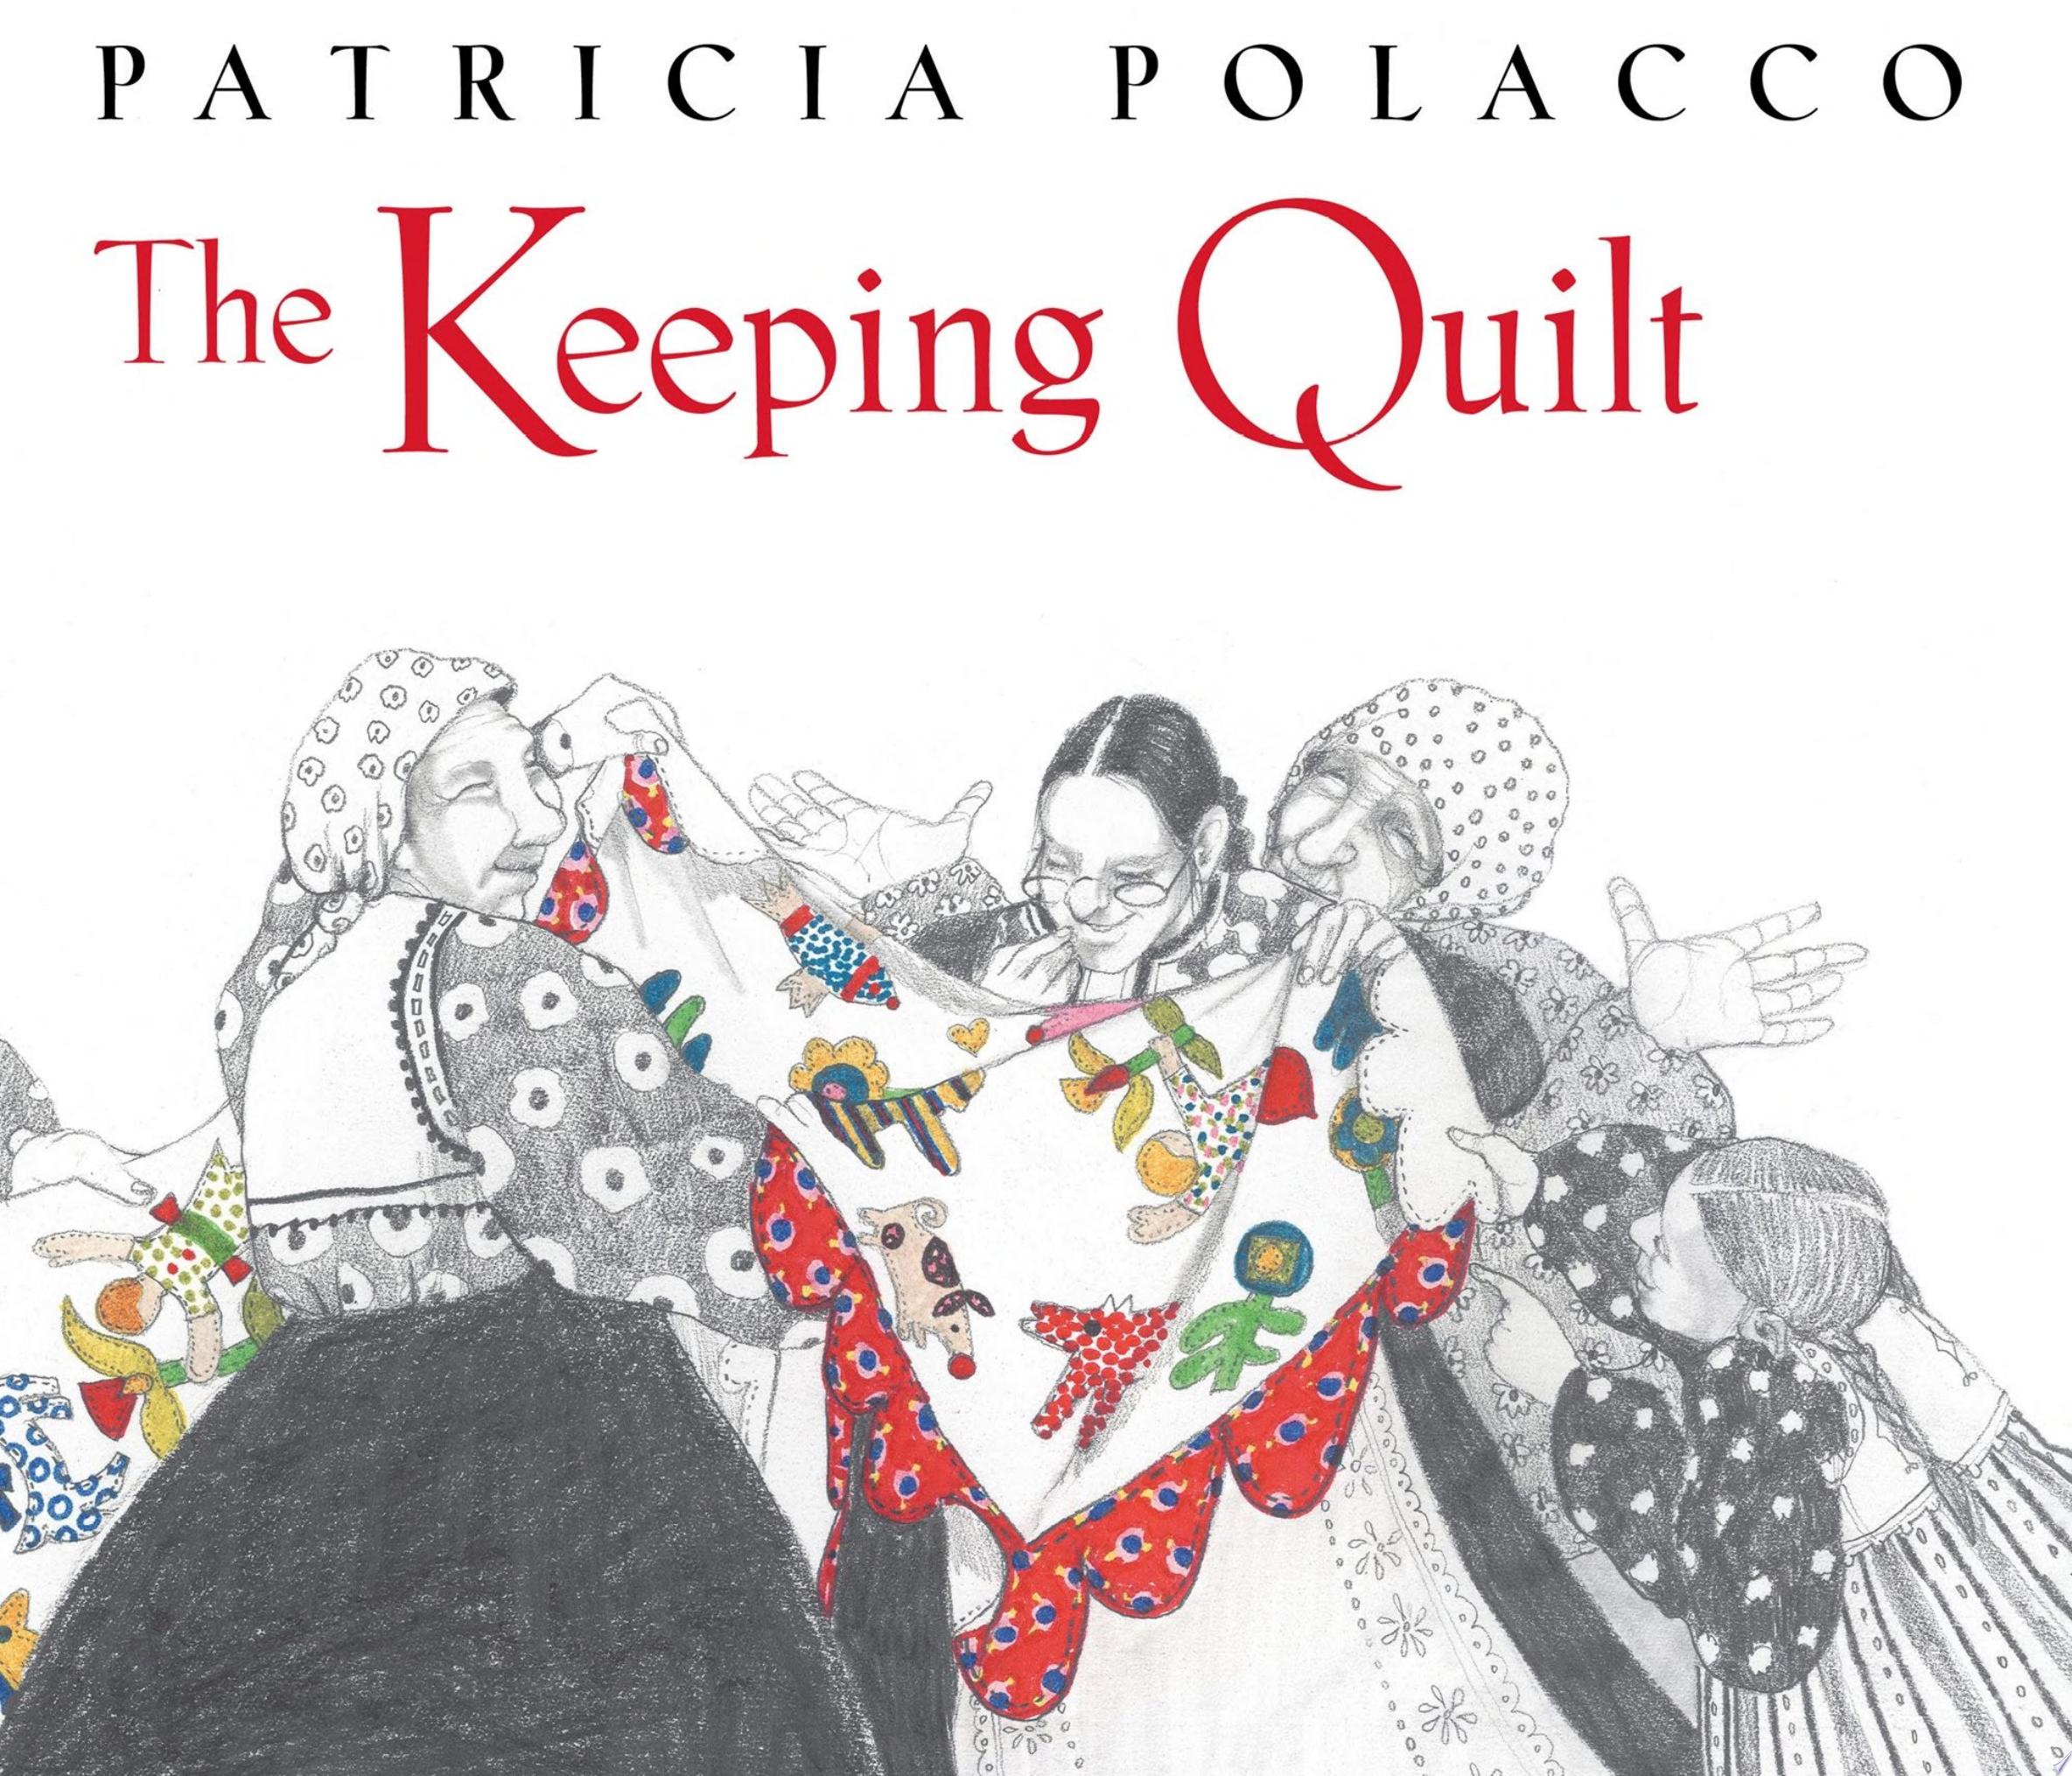 Image for "The Keeping Quilt"